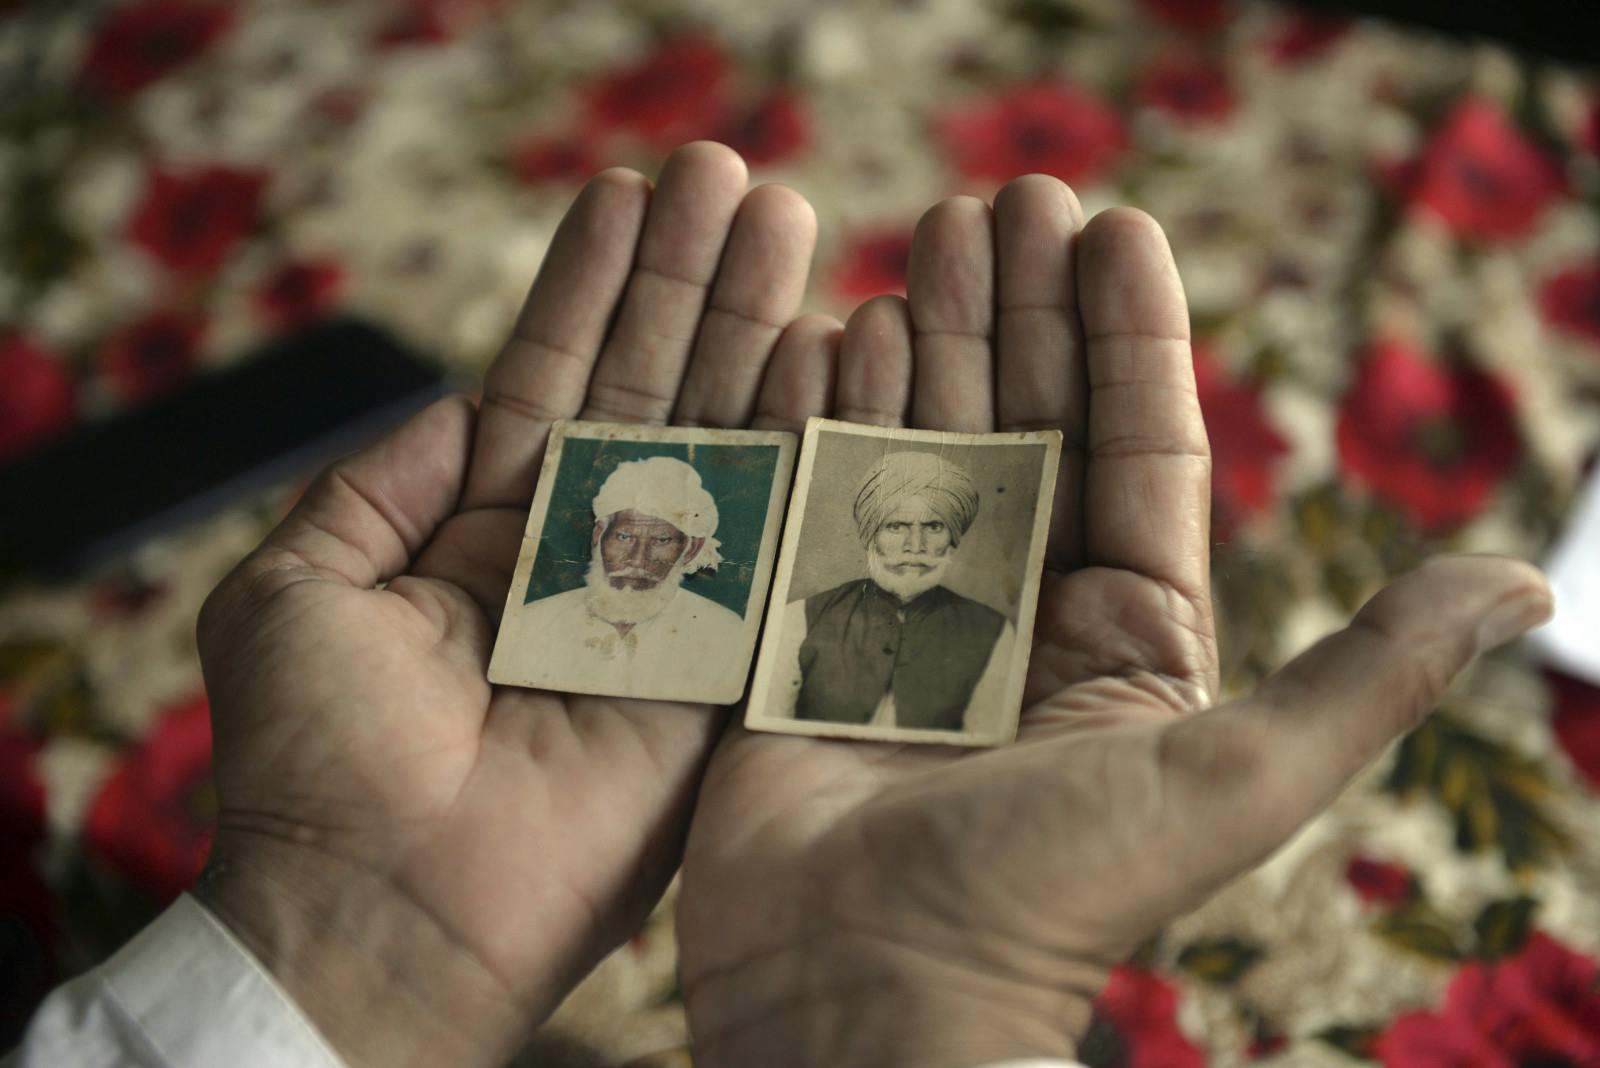 Shahbaz Khan shows pictures of his uncle Inayat Khan (left), who was also separated from the family at the time of Partition and died in India a few years ago, and his late father Sharif Khan (Murtaza Ali/picture-alliance/dpa/AP Images)